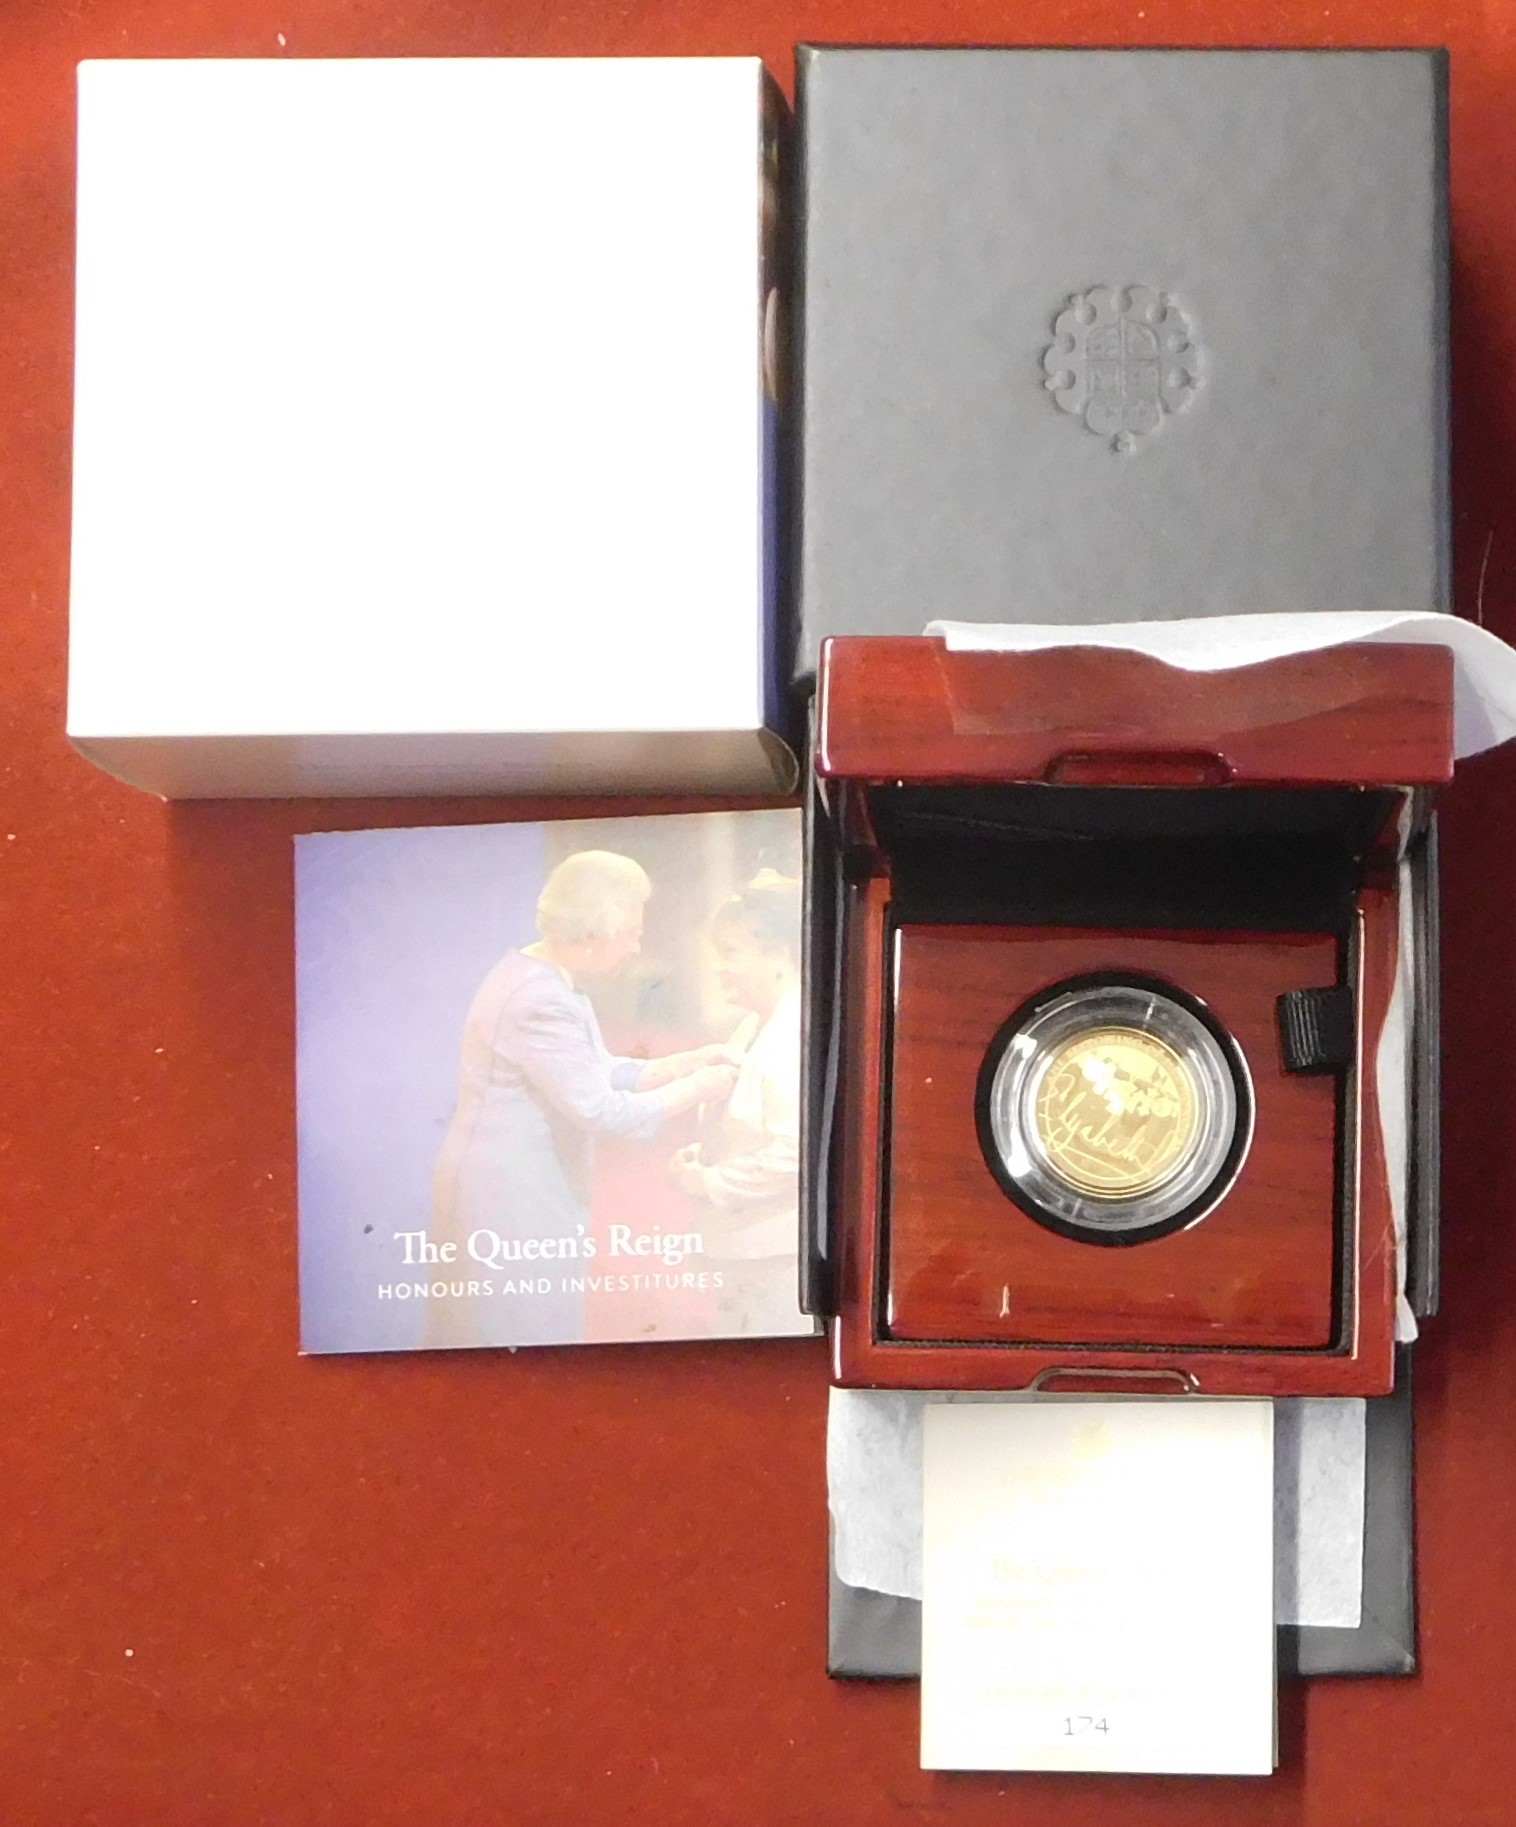 Gold 2022 United Kingdom Queen's Honours and Investitures quarter ounce proof coin, Royal Mint and